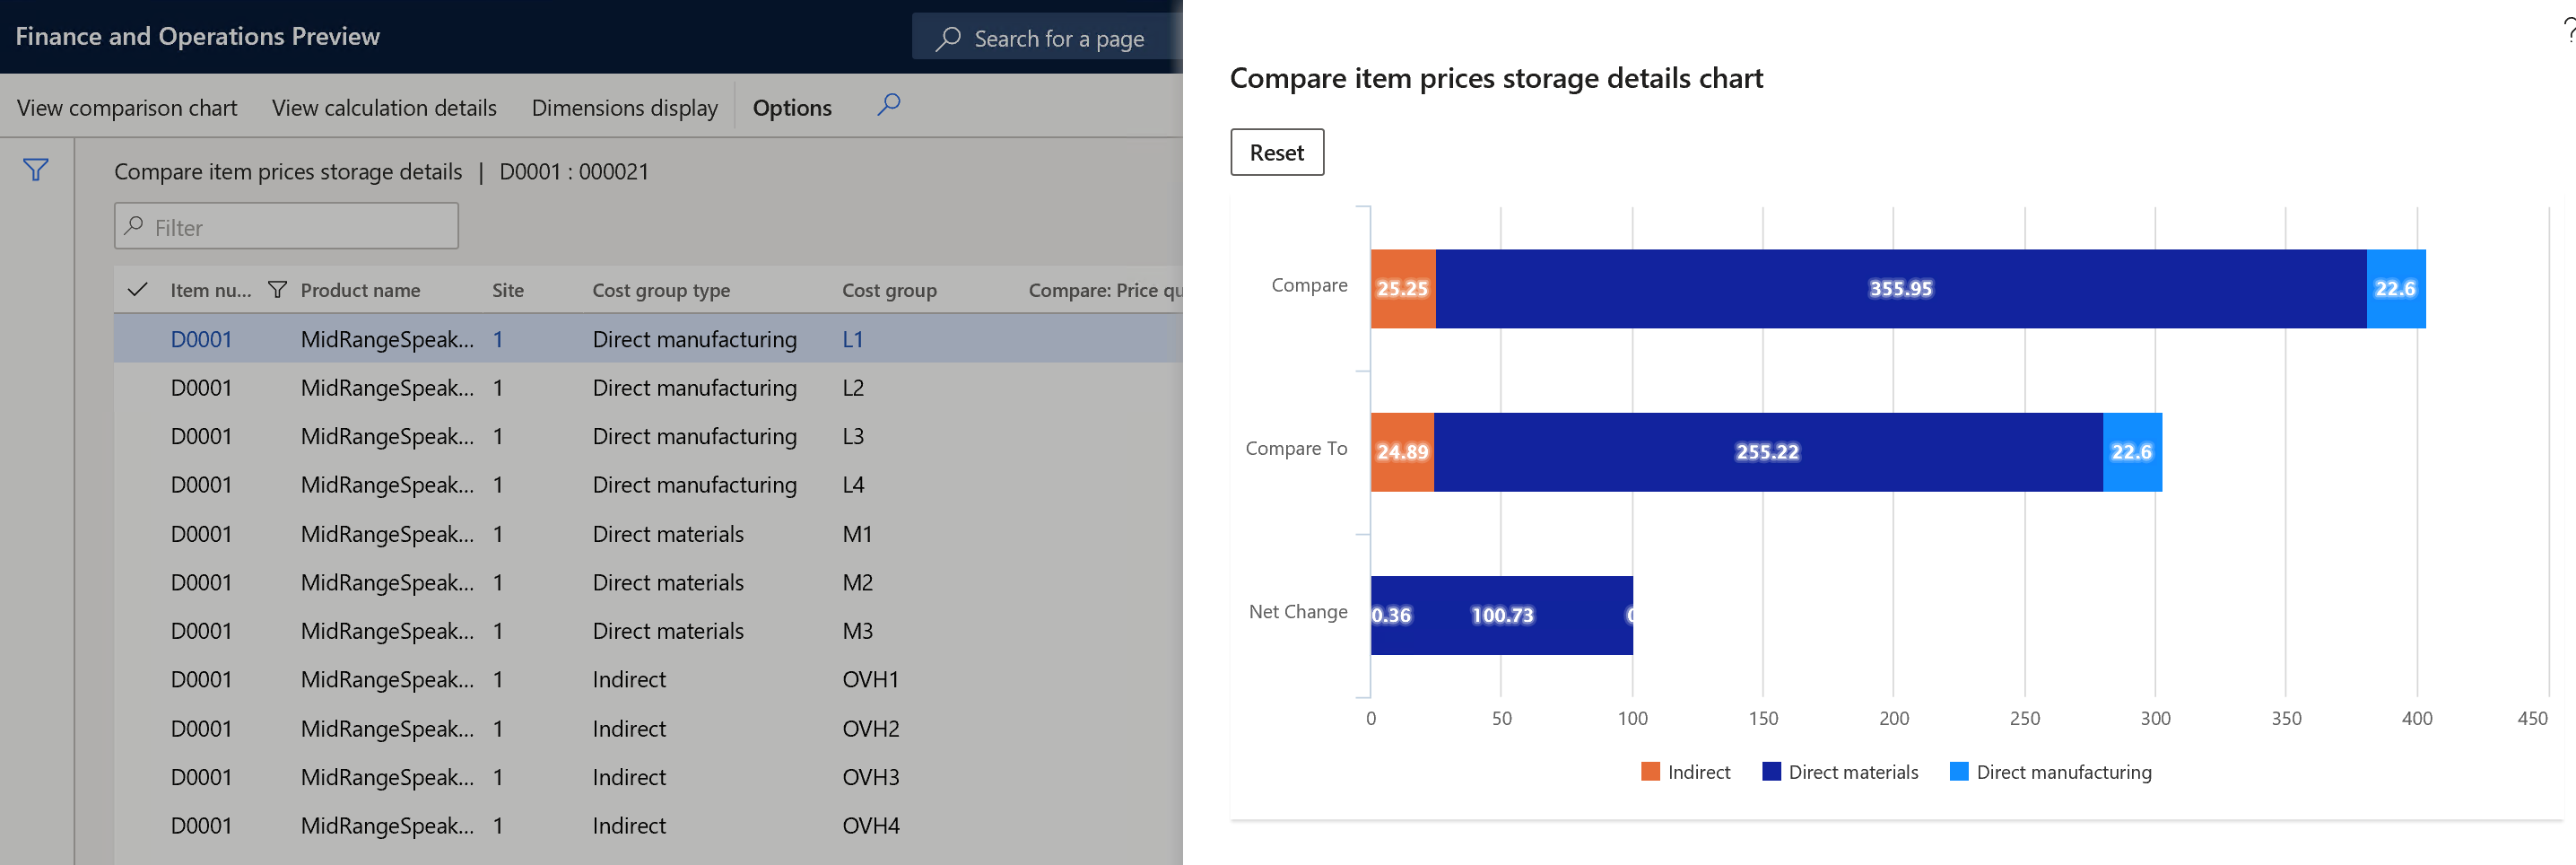 View comparison chart filtered by item with breakdown by Cost group type and Cost group